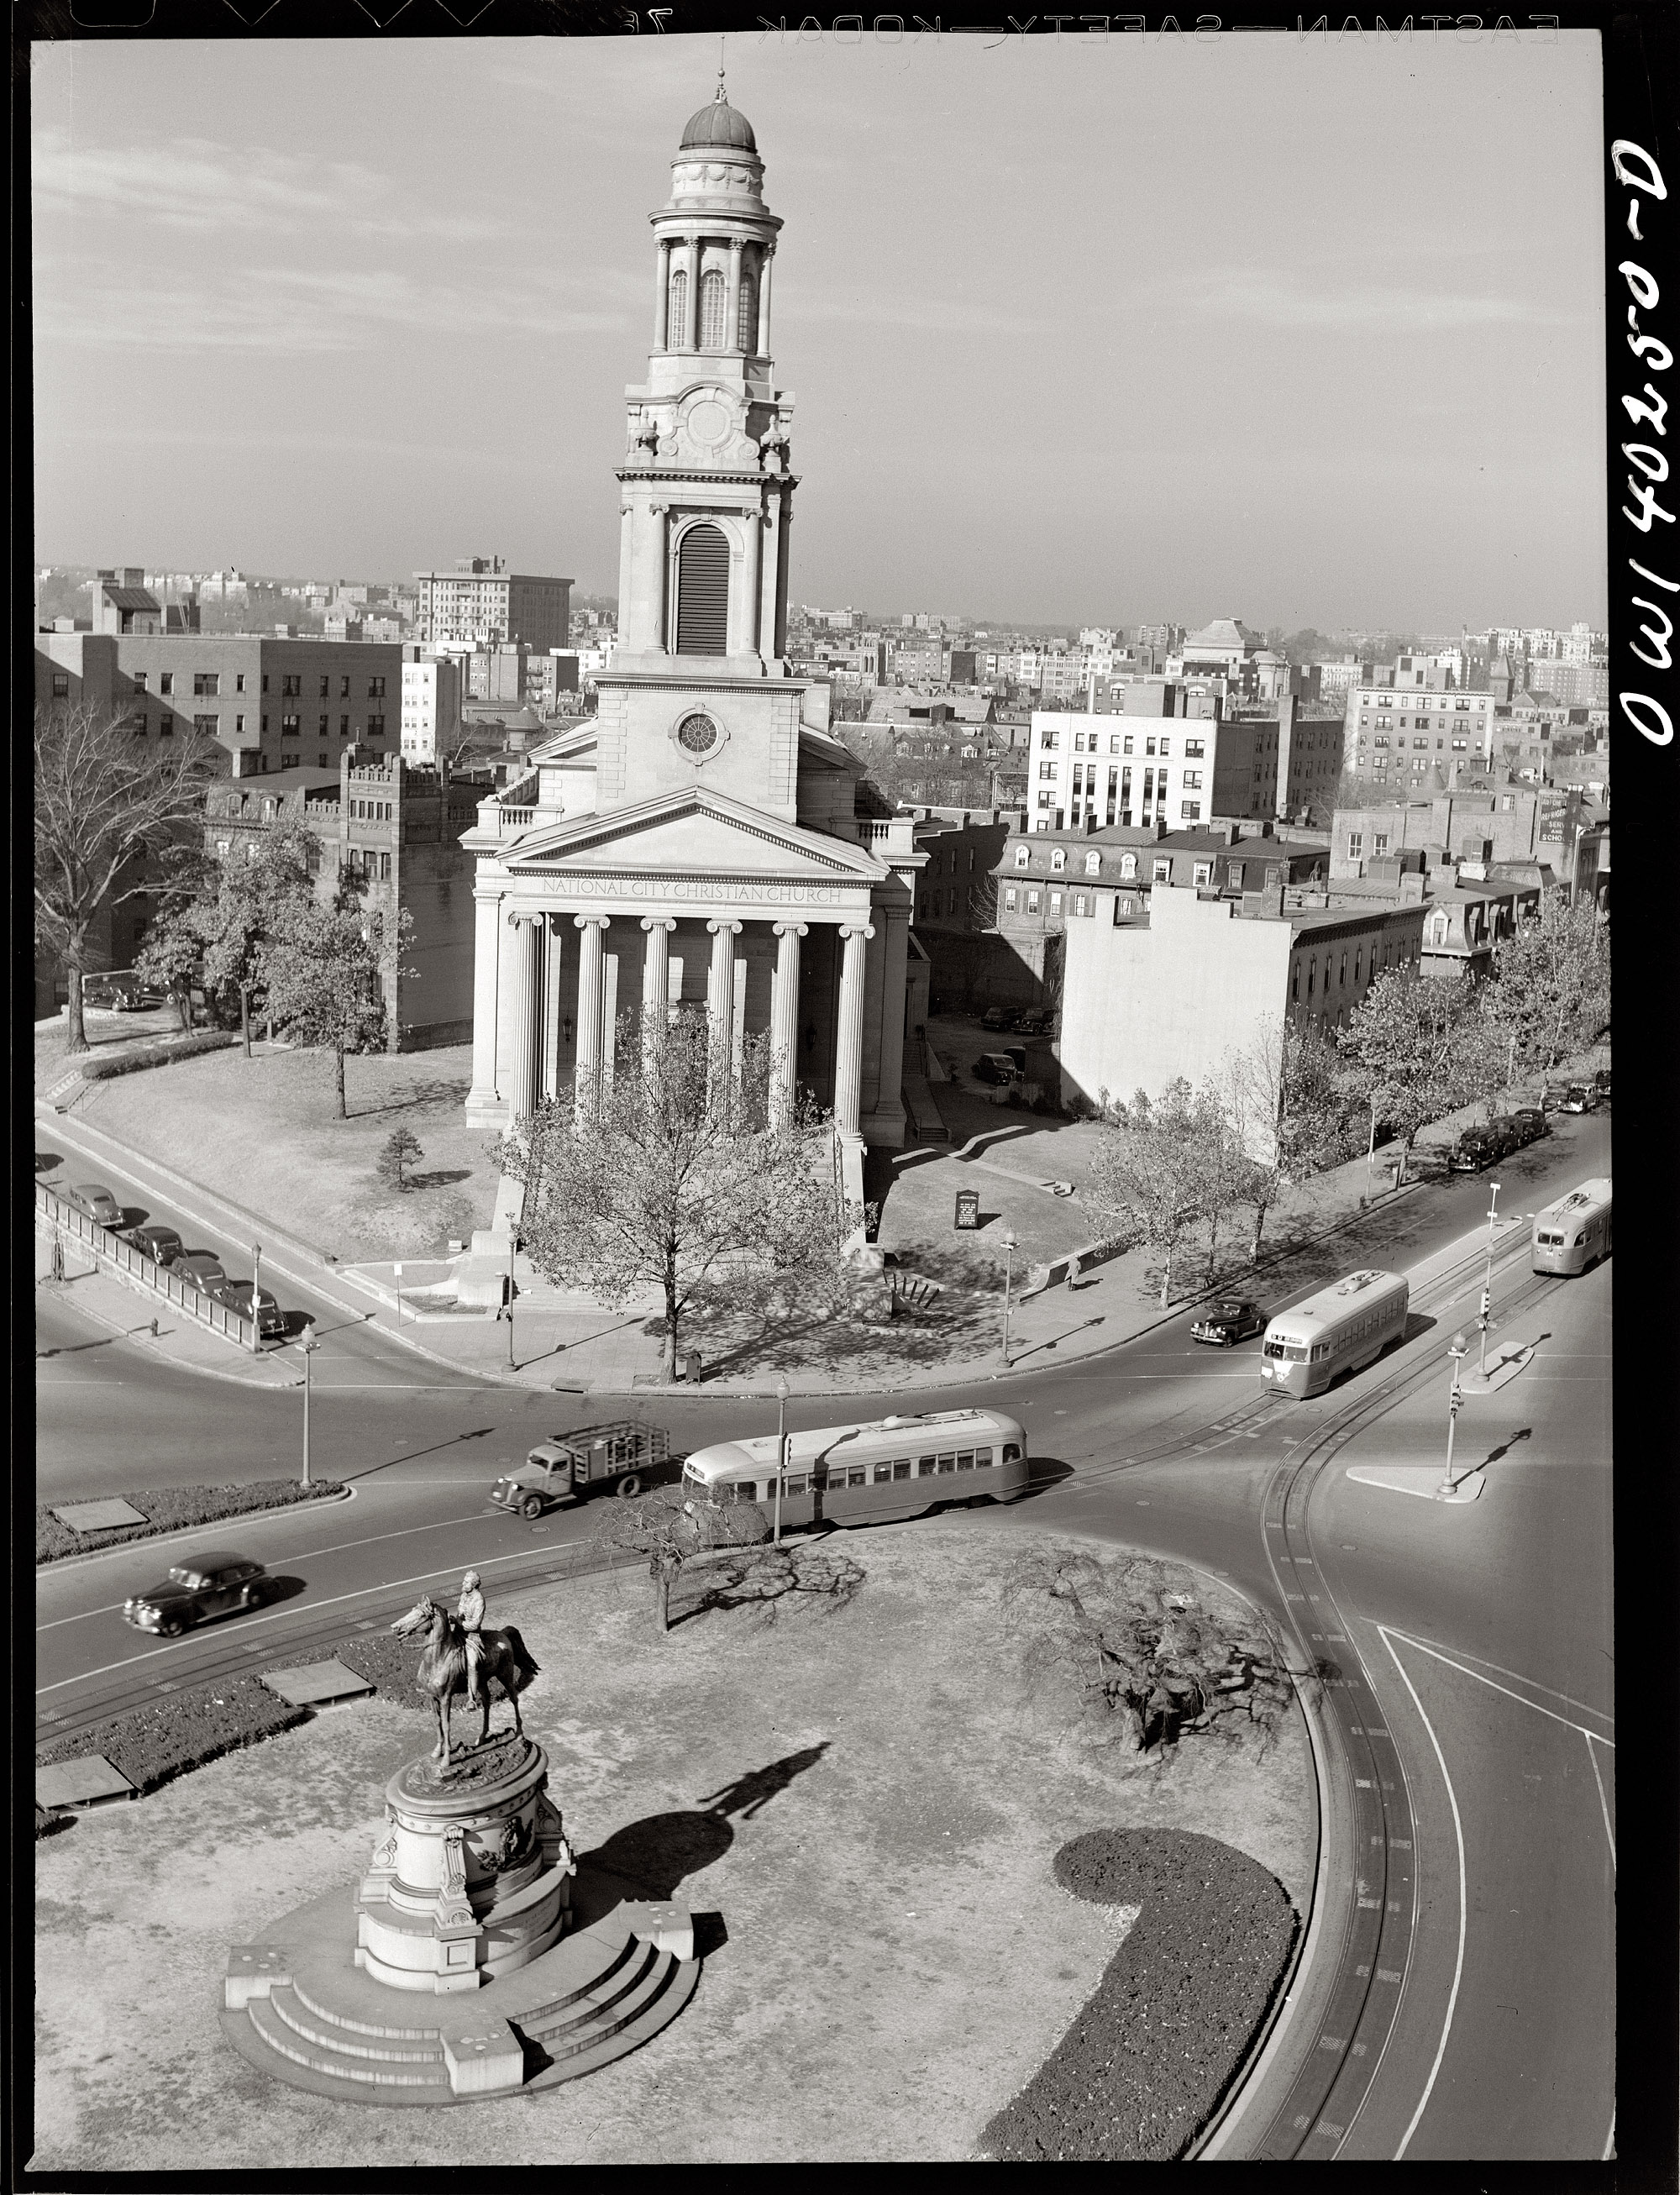 December 1943. National City Christian Church on Thomas Circle in Washington, D.C. Medium-format safety negative by Esther Bubley. Superjumbo full size.